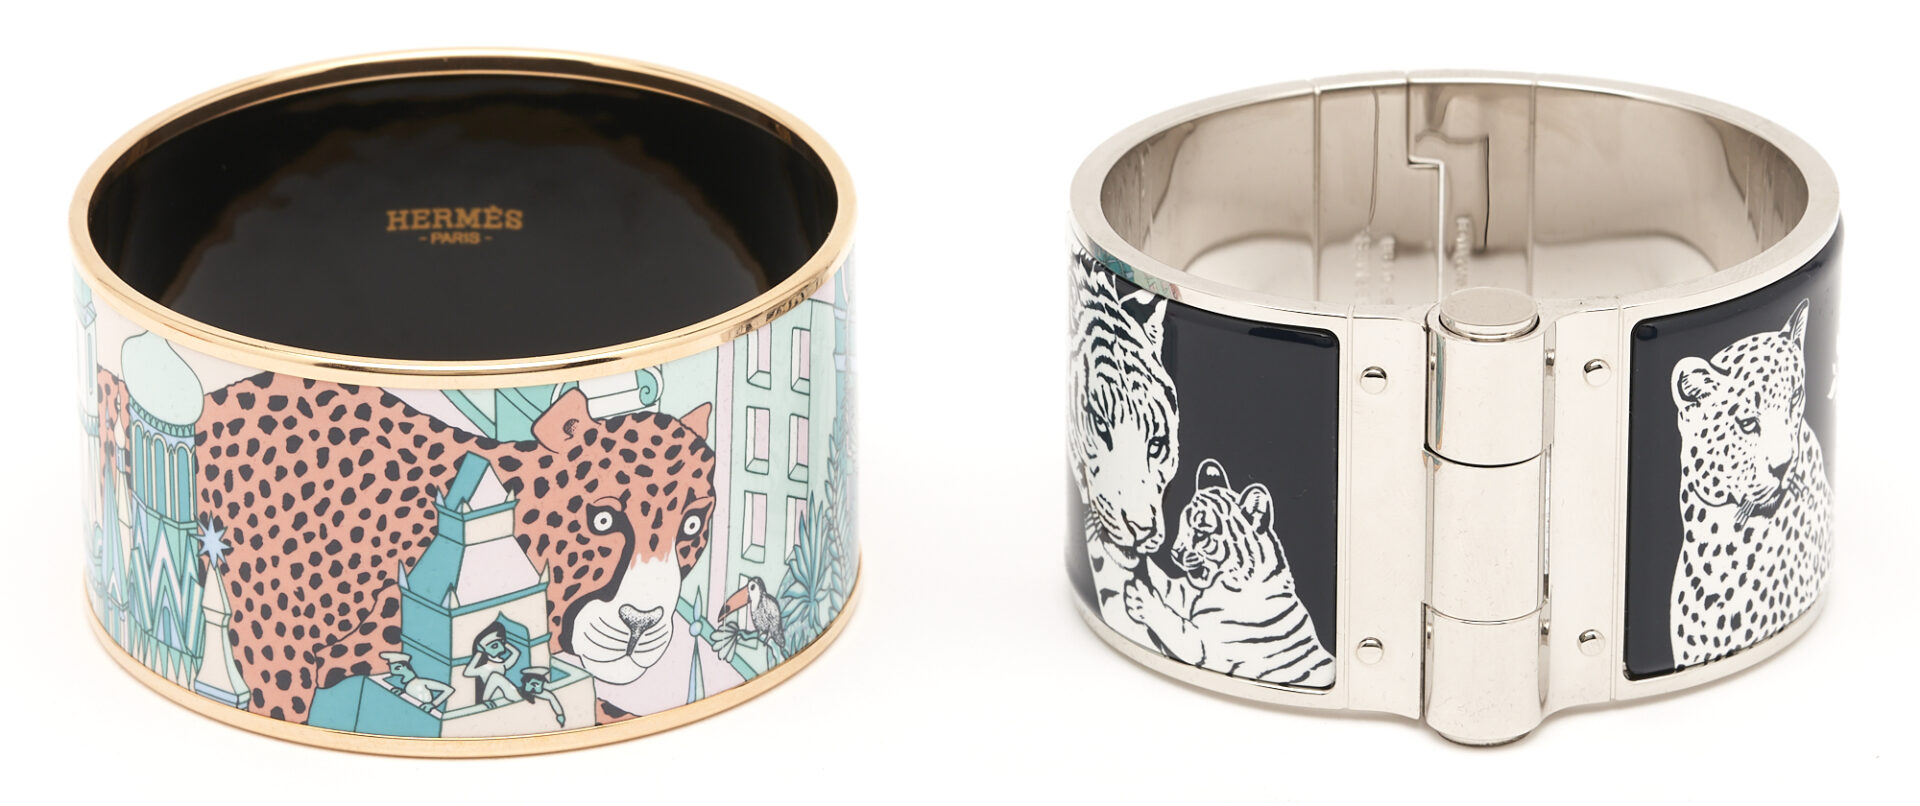 Lot 1143: 2 Limited Edition Hermes Extra Wide Printed Enamel Bracelets, Wild Cats